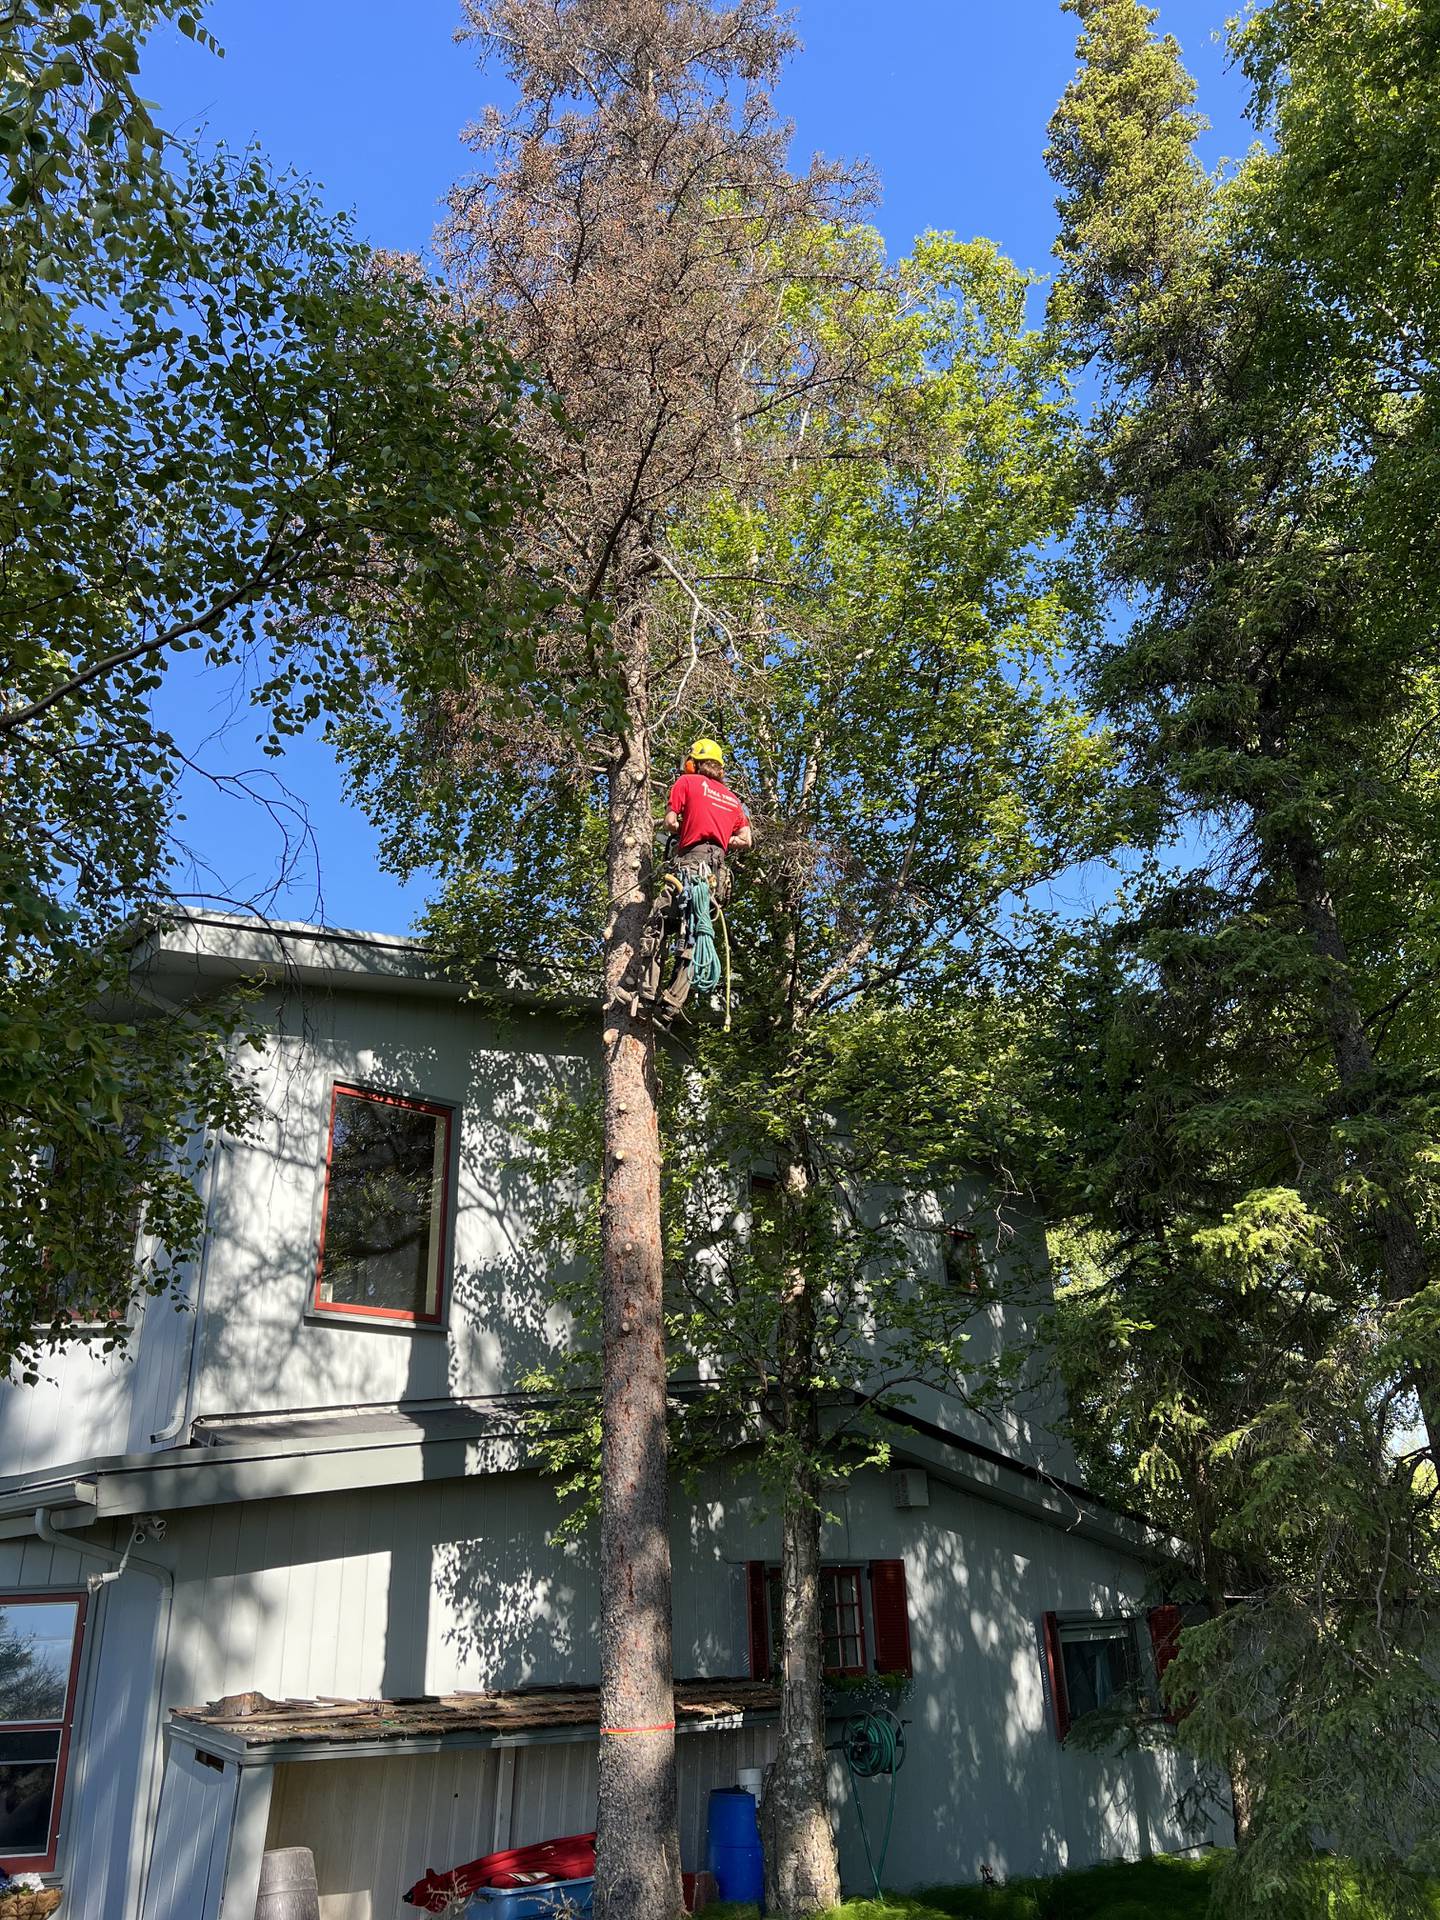 A crew works to remove a dead tree